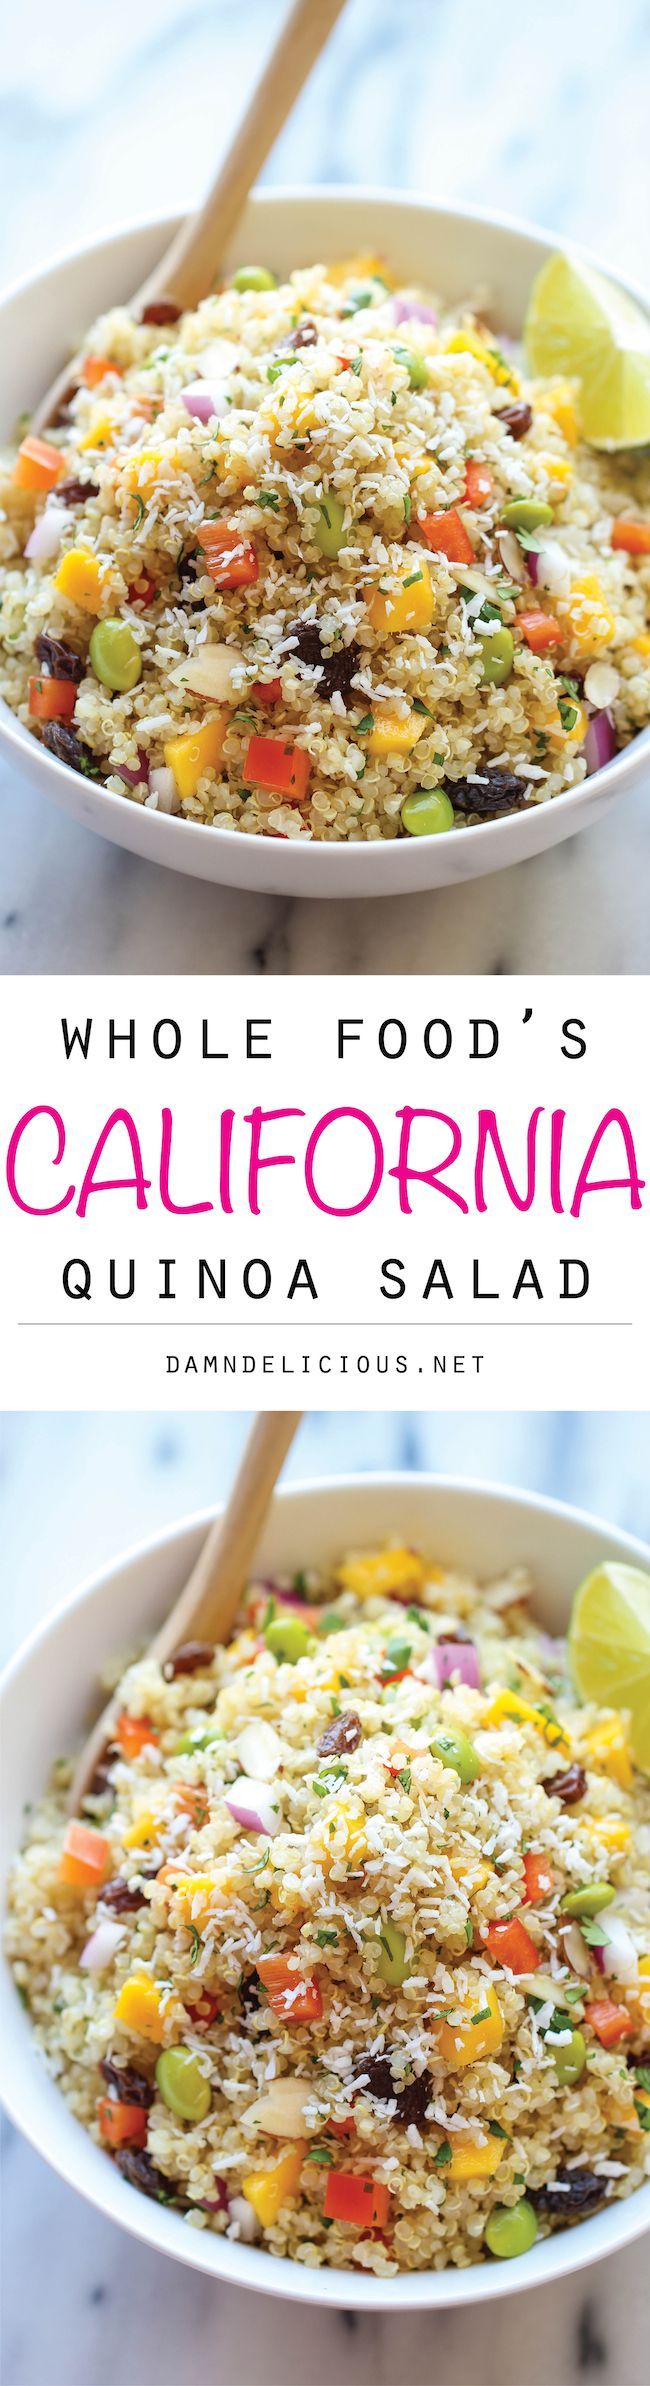 Whole Food’s California Quinoa Salad – A healthy, nutritious copycat recipe that tastes 1000x better than the store-bought